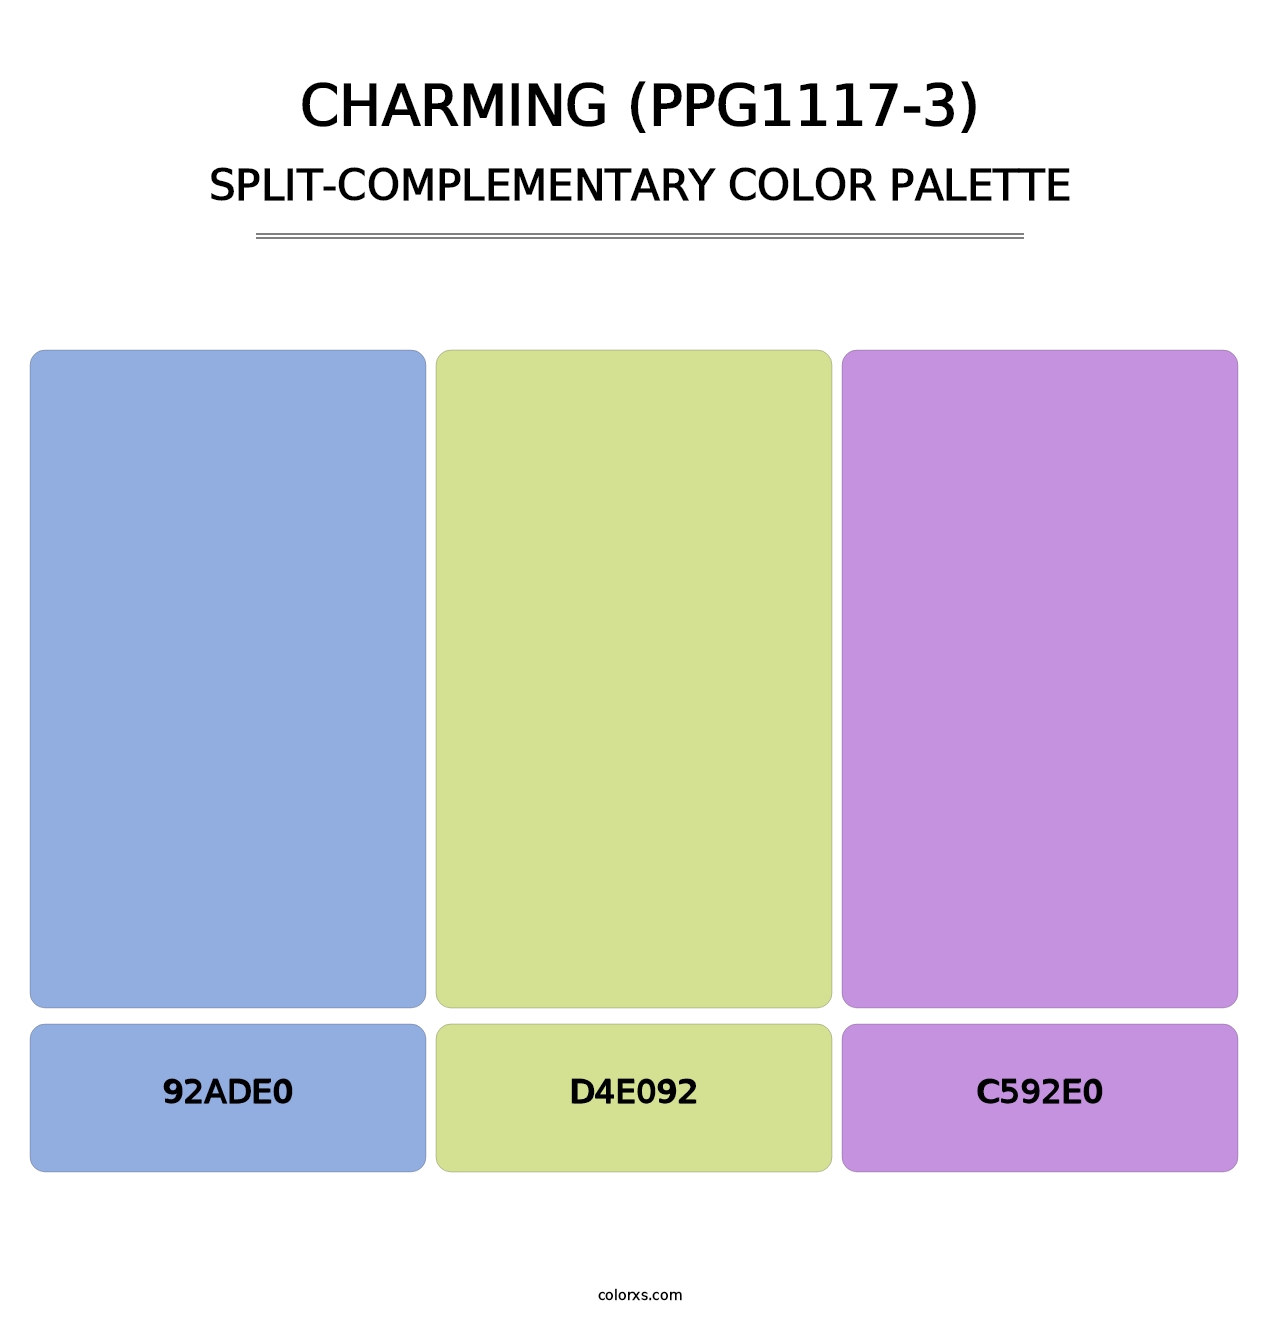 Charming (PPG1117-3) - Split-Complementary Color Palette